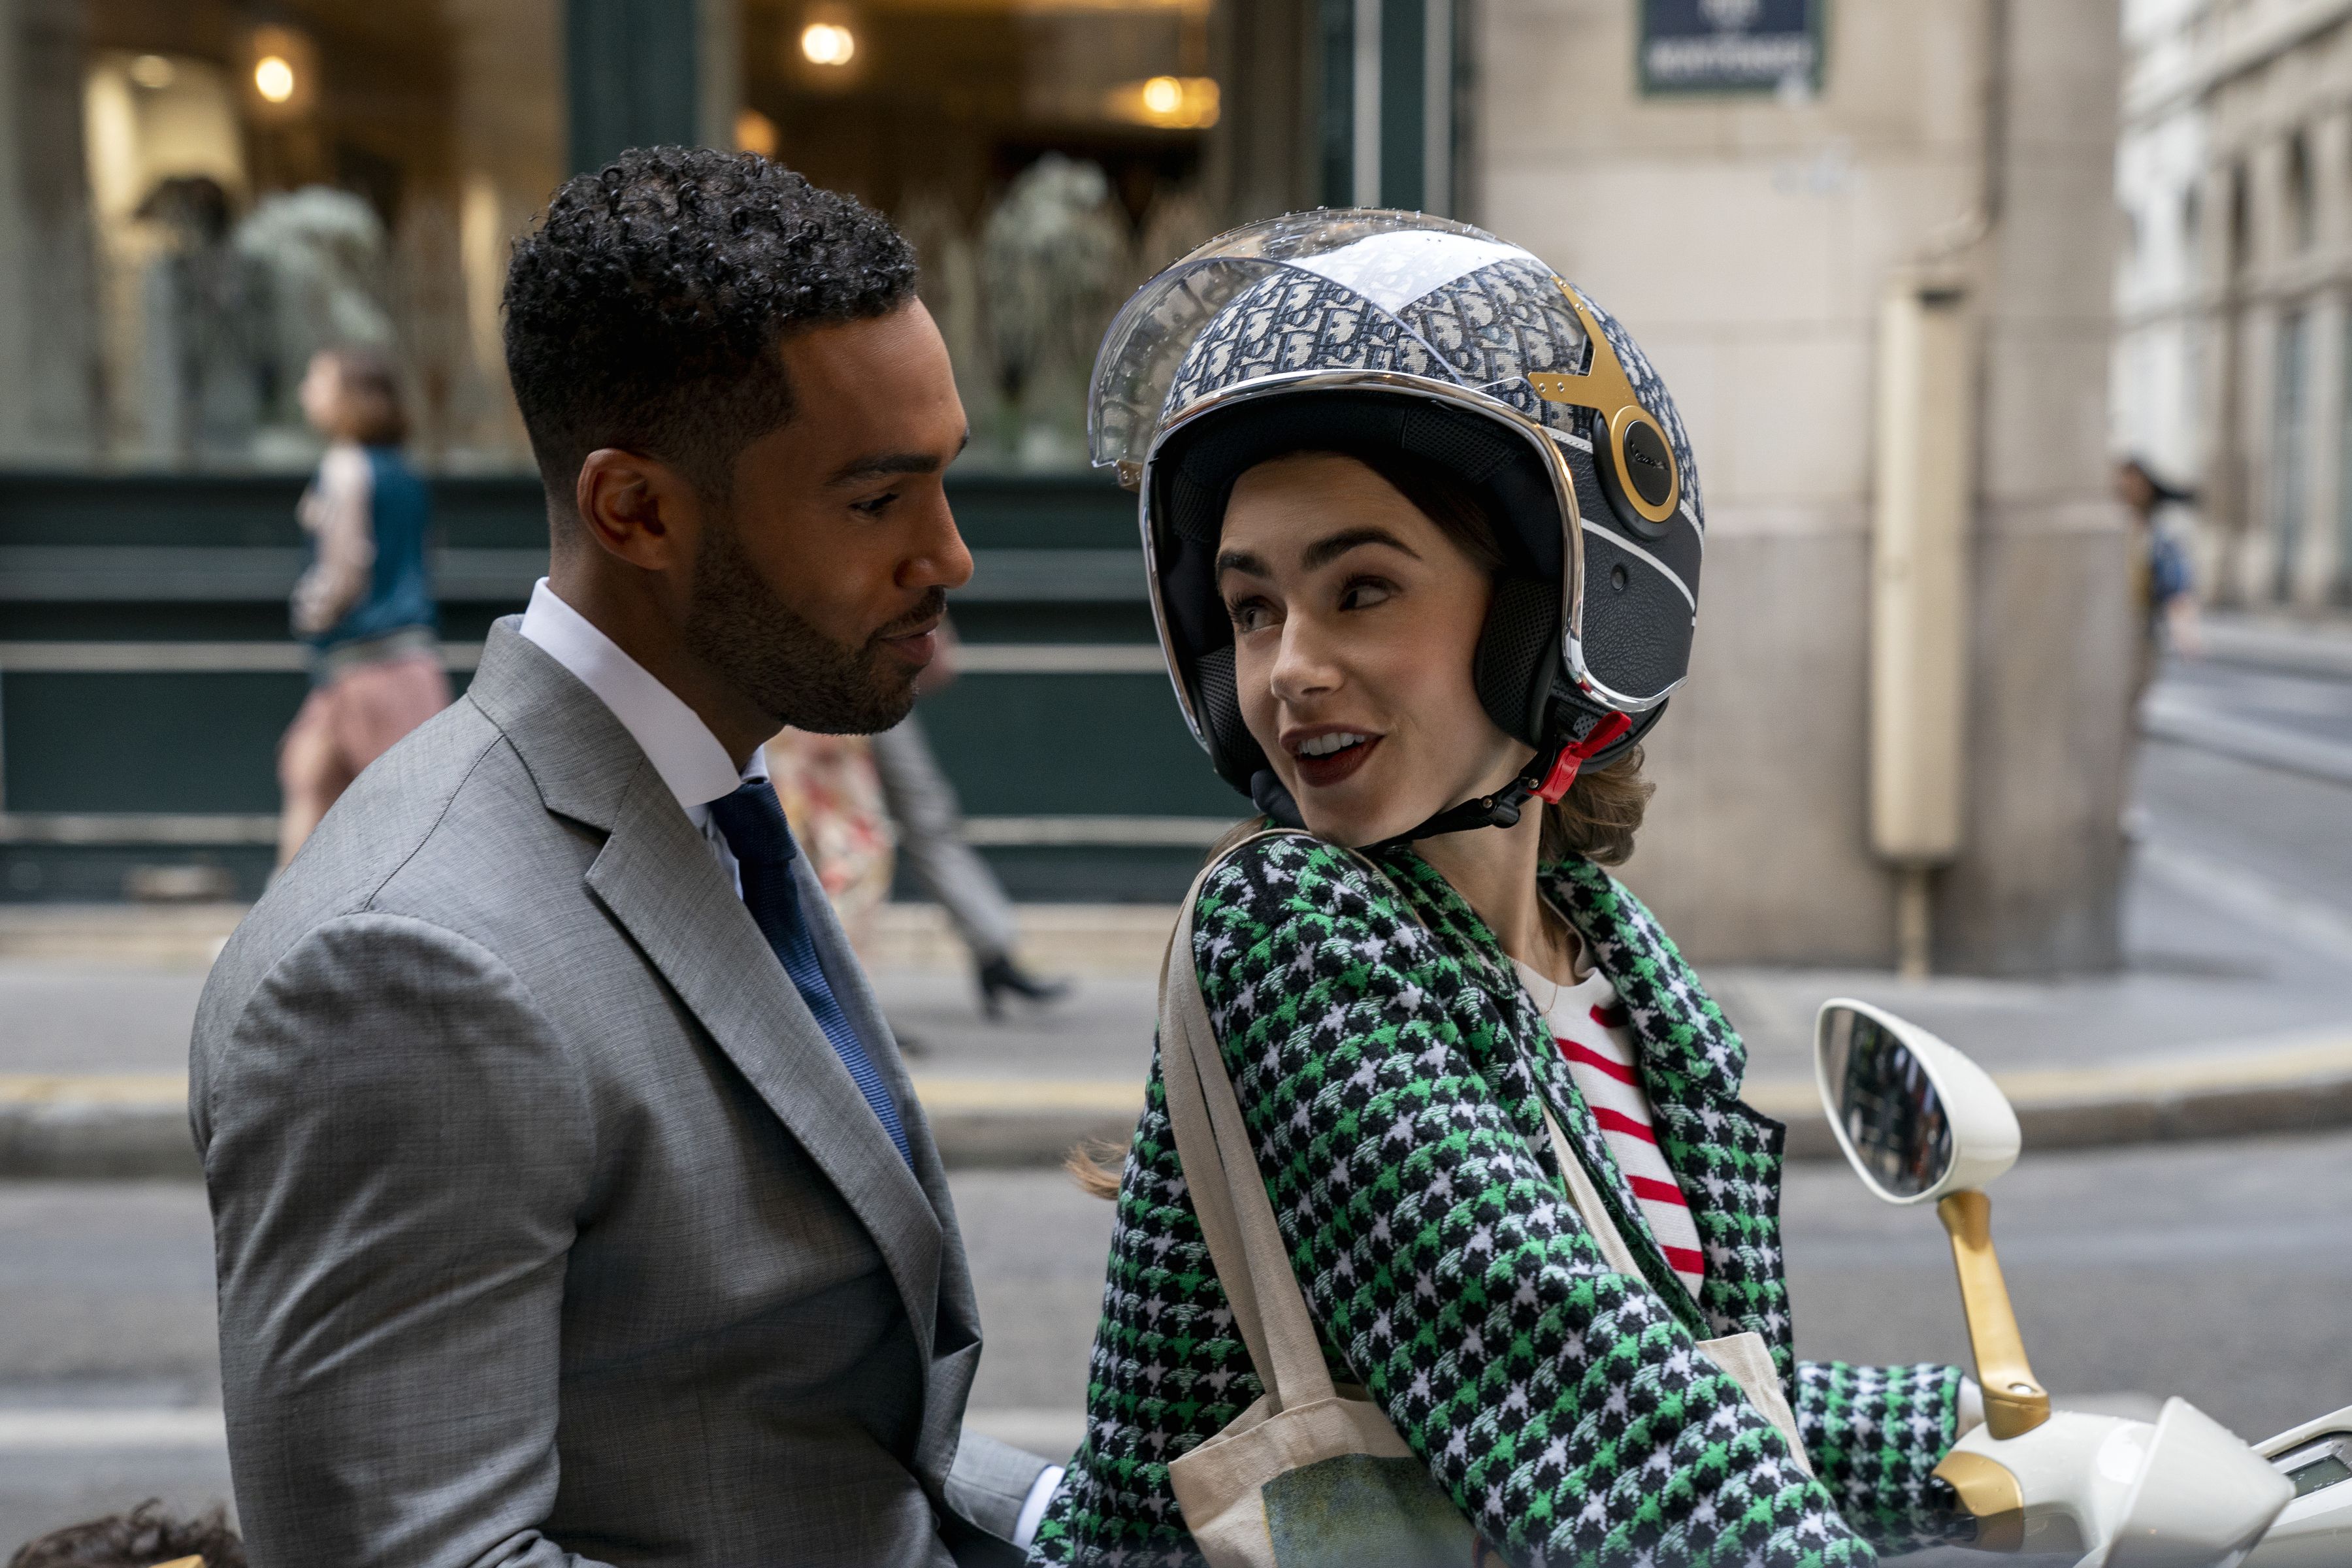 Emily in Paris Season 2: See Photos From the Set